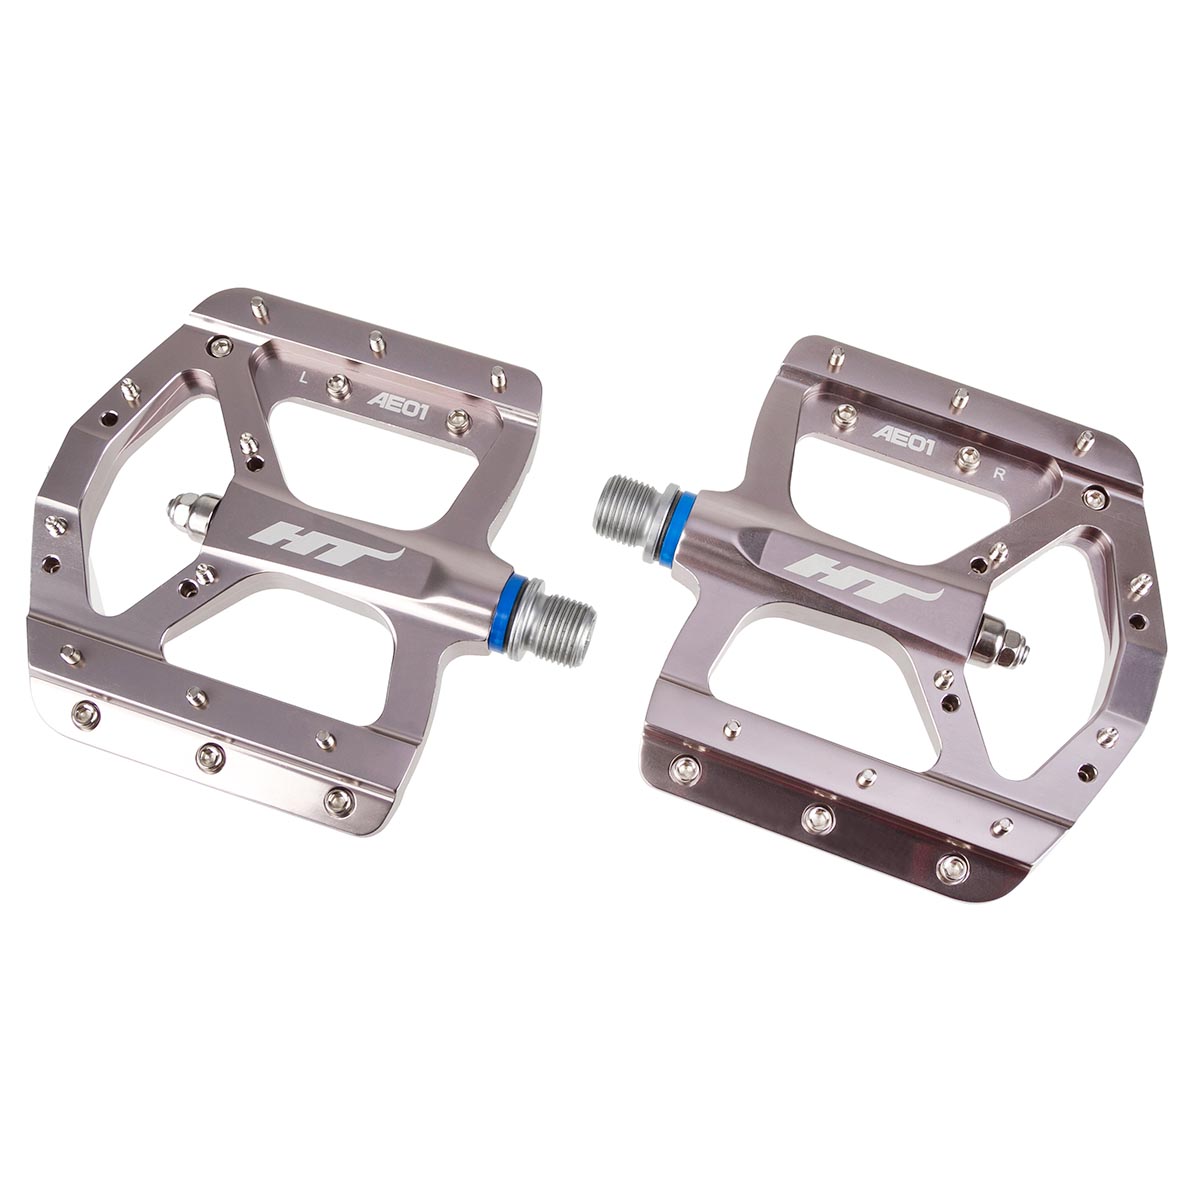 HT Components Pedals AE01 Grey